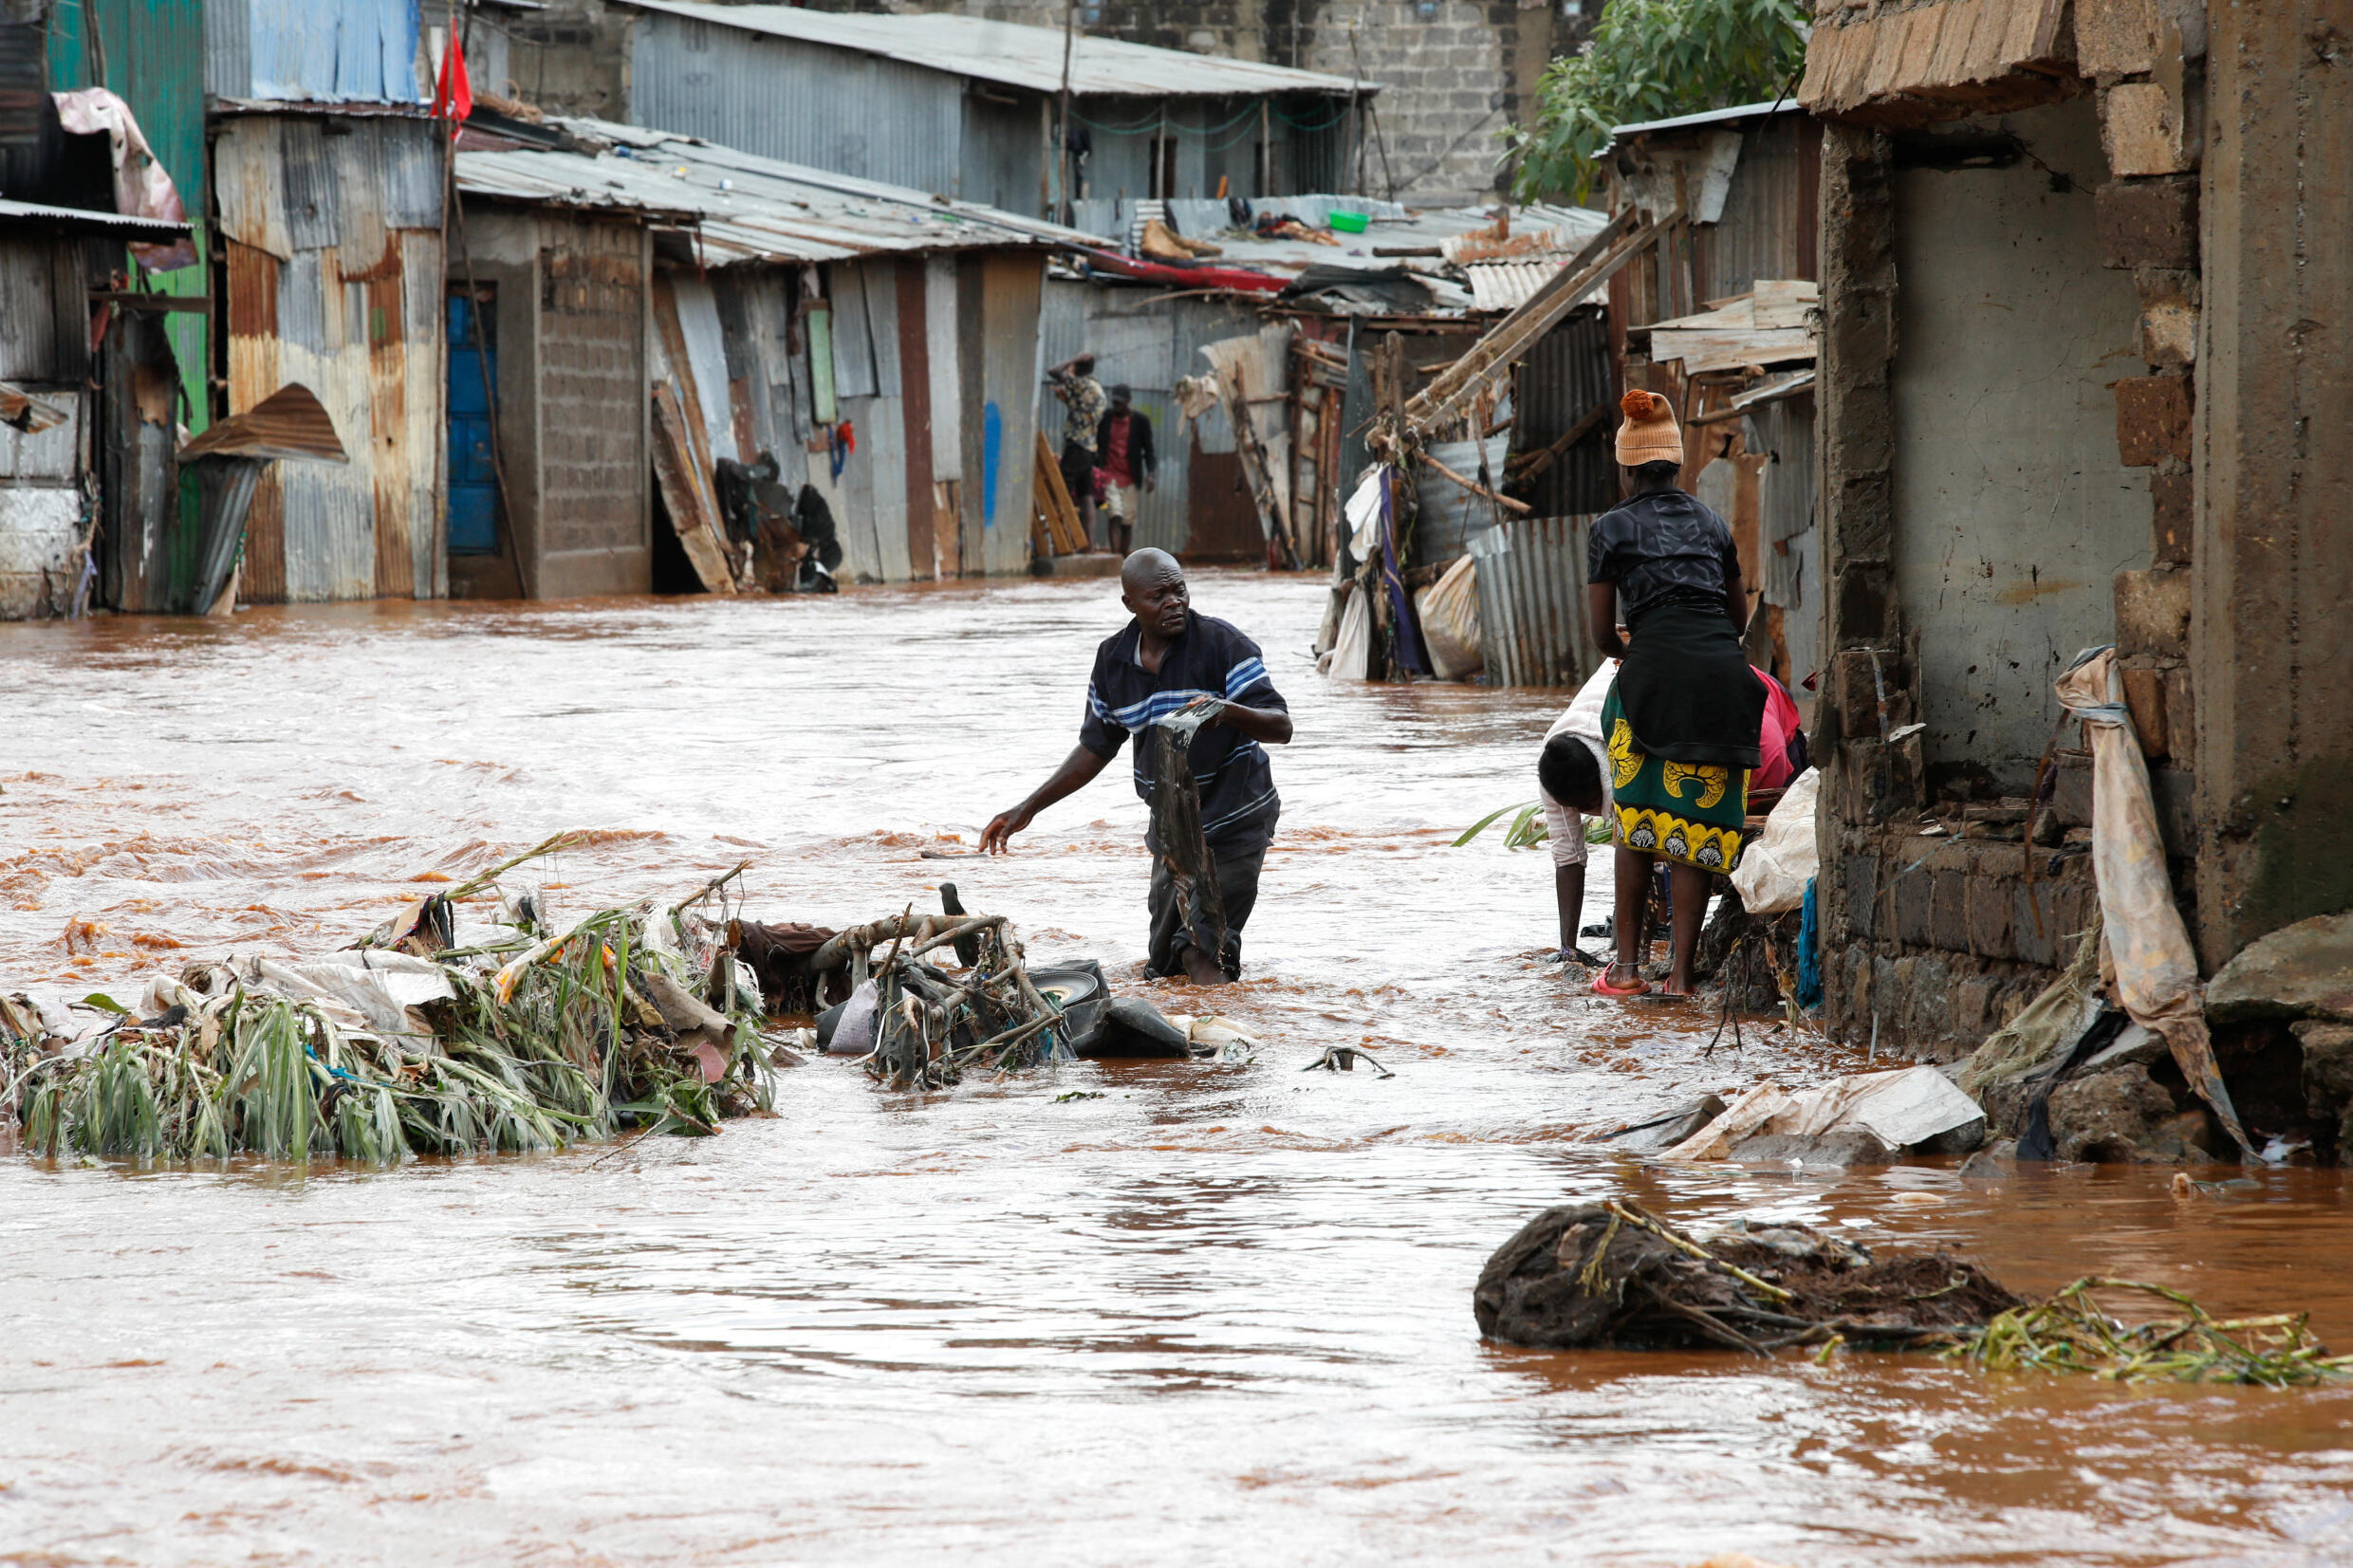 Residents wade through flood waters as they try to recover their belongings after the Nairobi river burst its banks within the Mathare valley settlement in Nairobi.